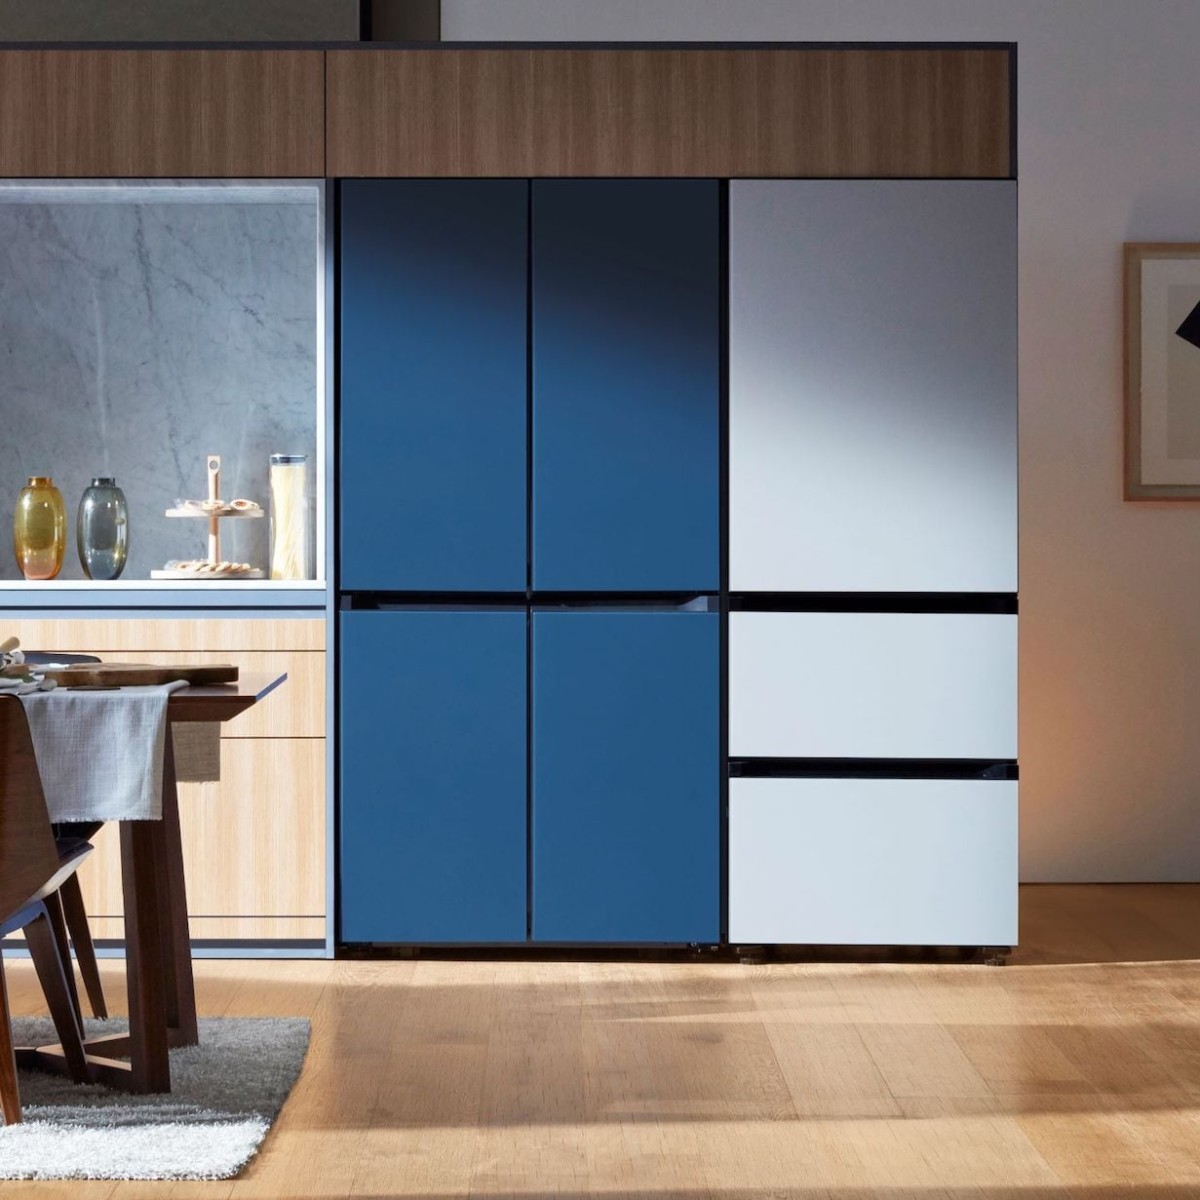 Samsung 4D-Flex BESPOKE Customizable Refrigerator lets you add modules as your needs change